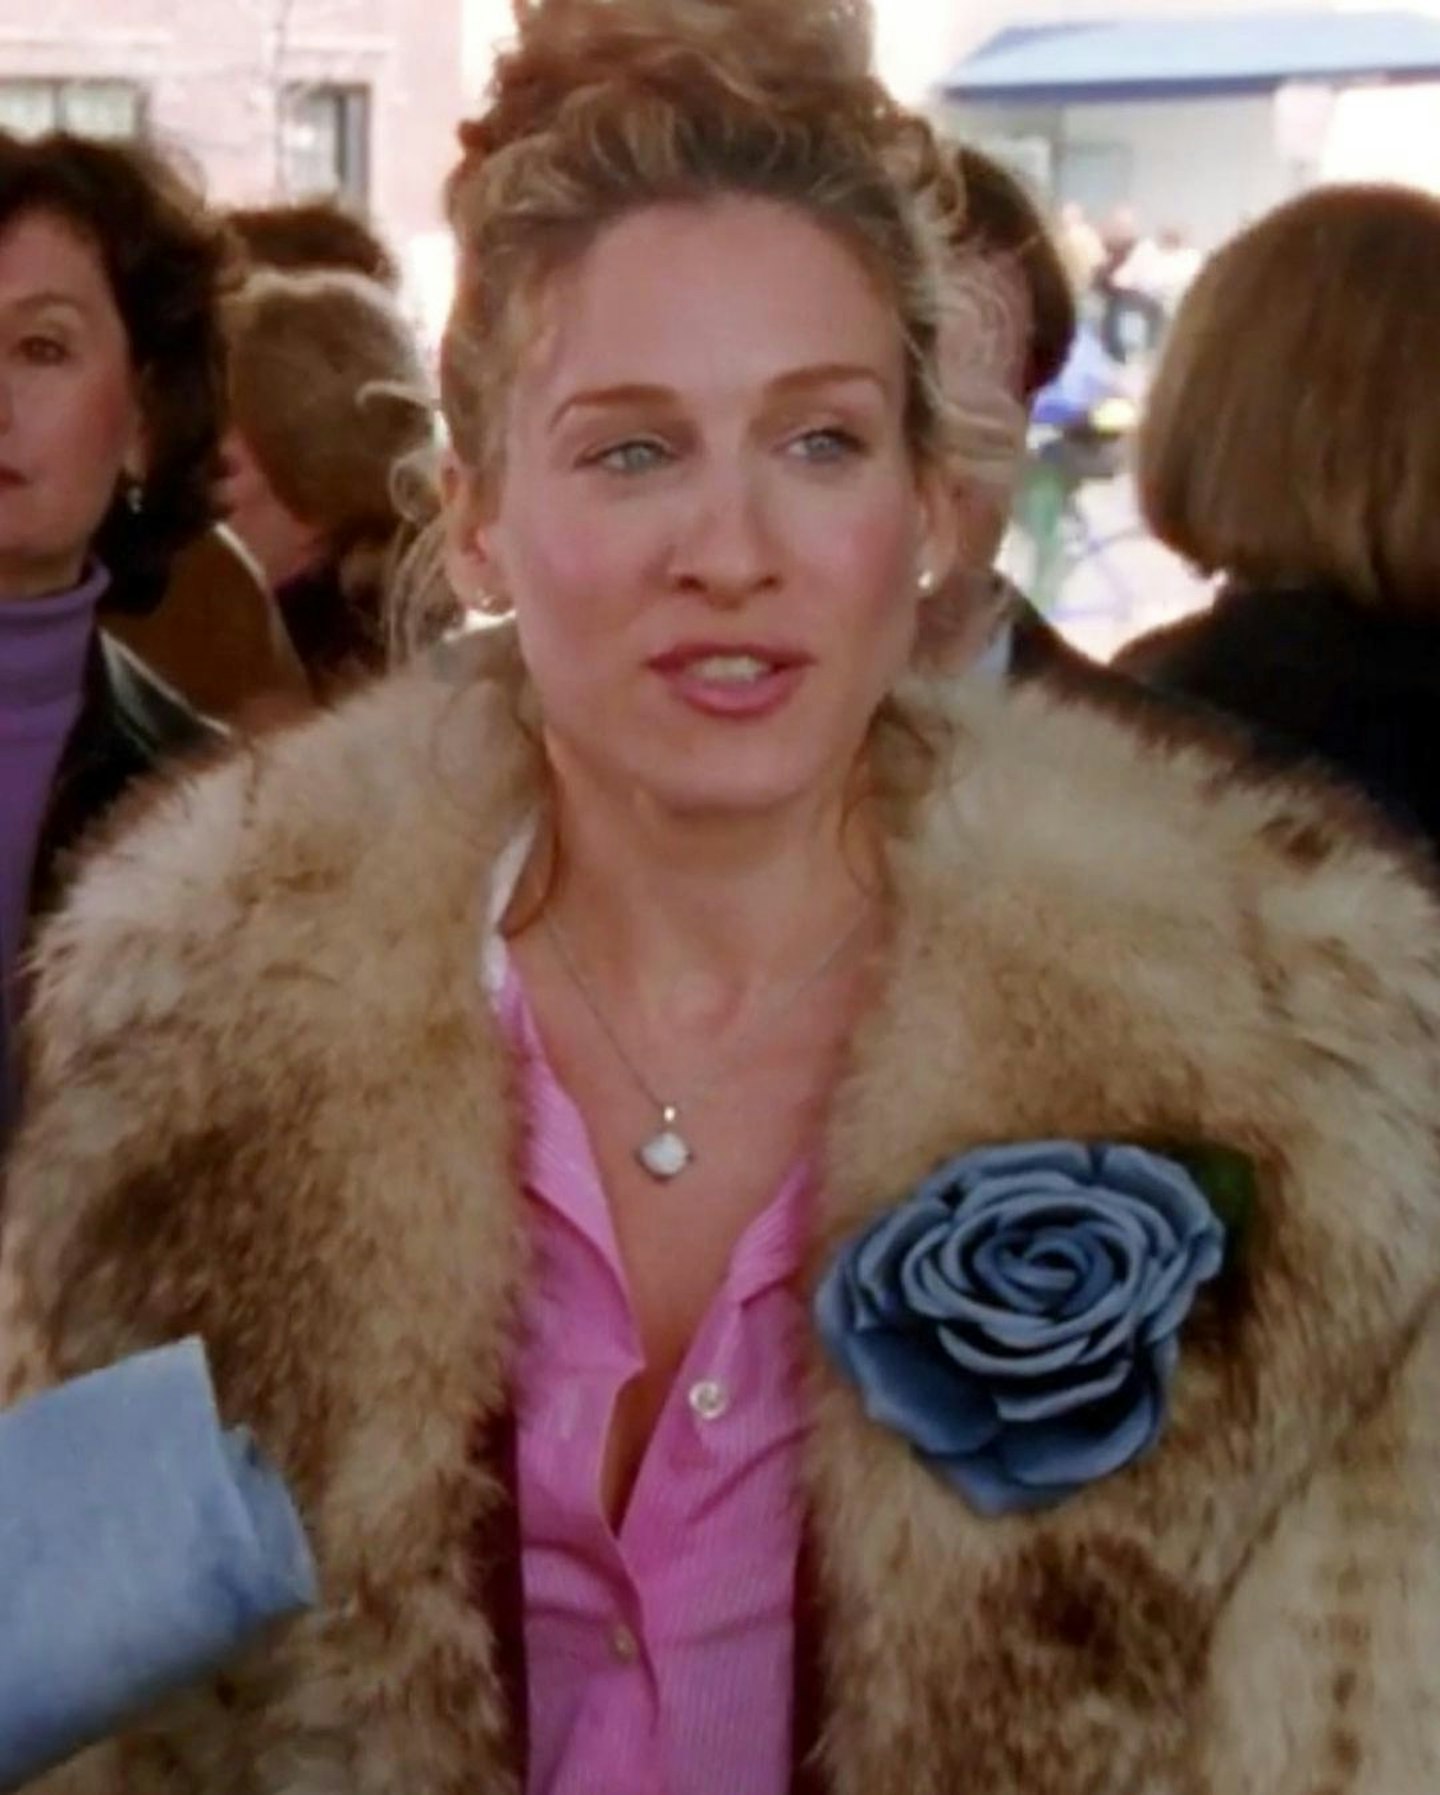 Meaning Behind Carrie Bradshaw Flower Pin In SATC